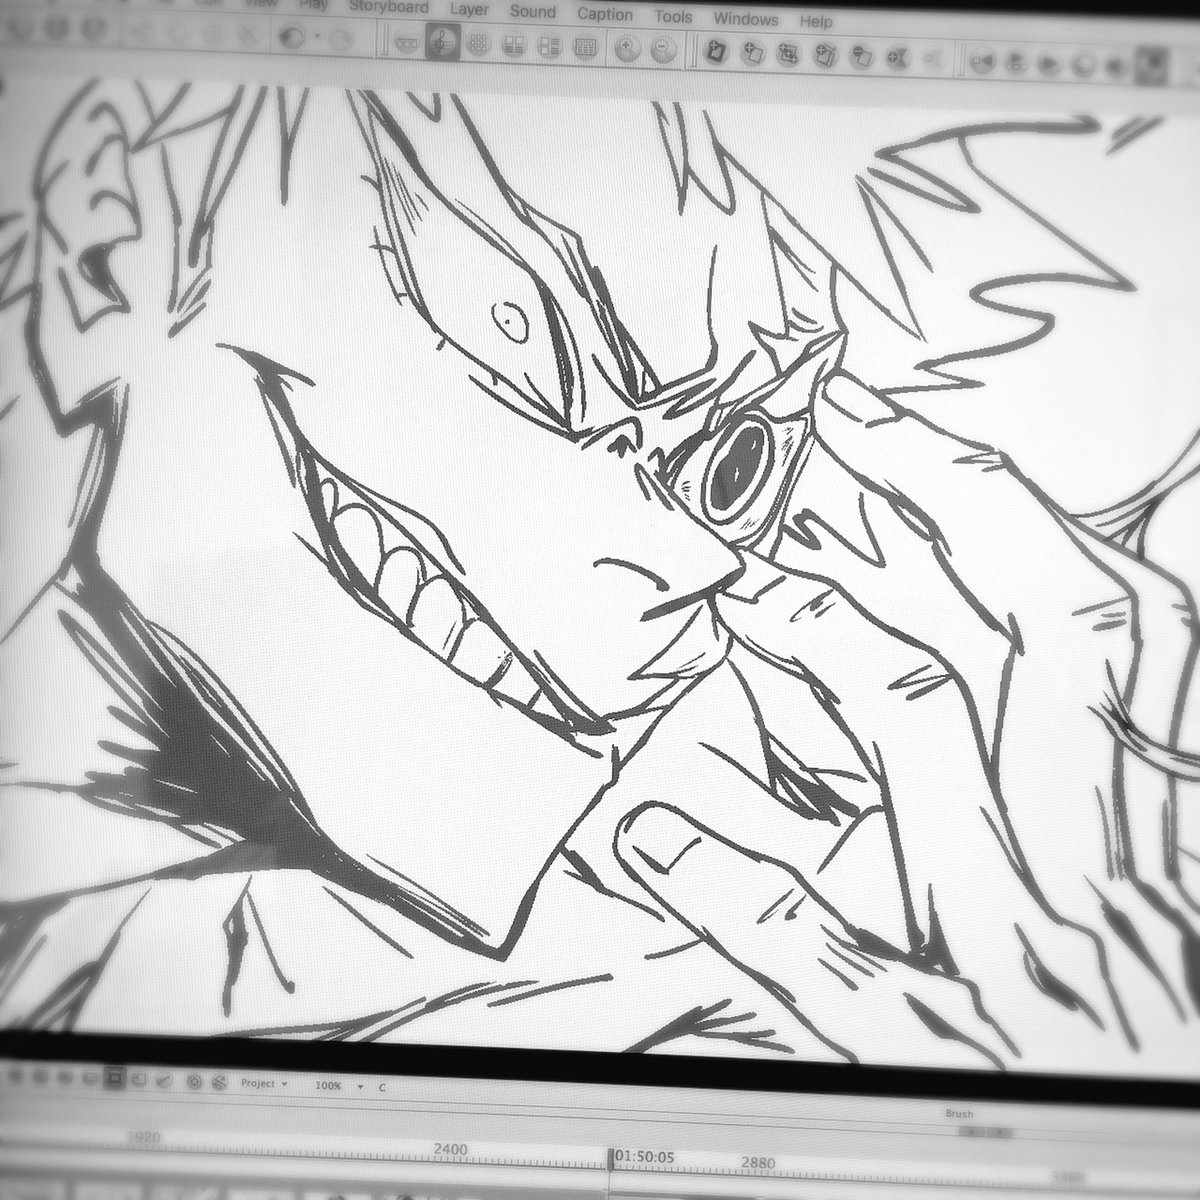 WIPs - Thanks to this brute, I can work on insane expressions without retenue ?
#mha #bnha #heroaca_a #muscular #マスキュラー 